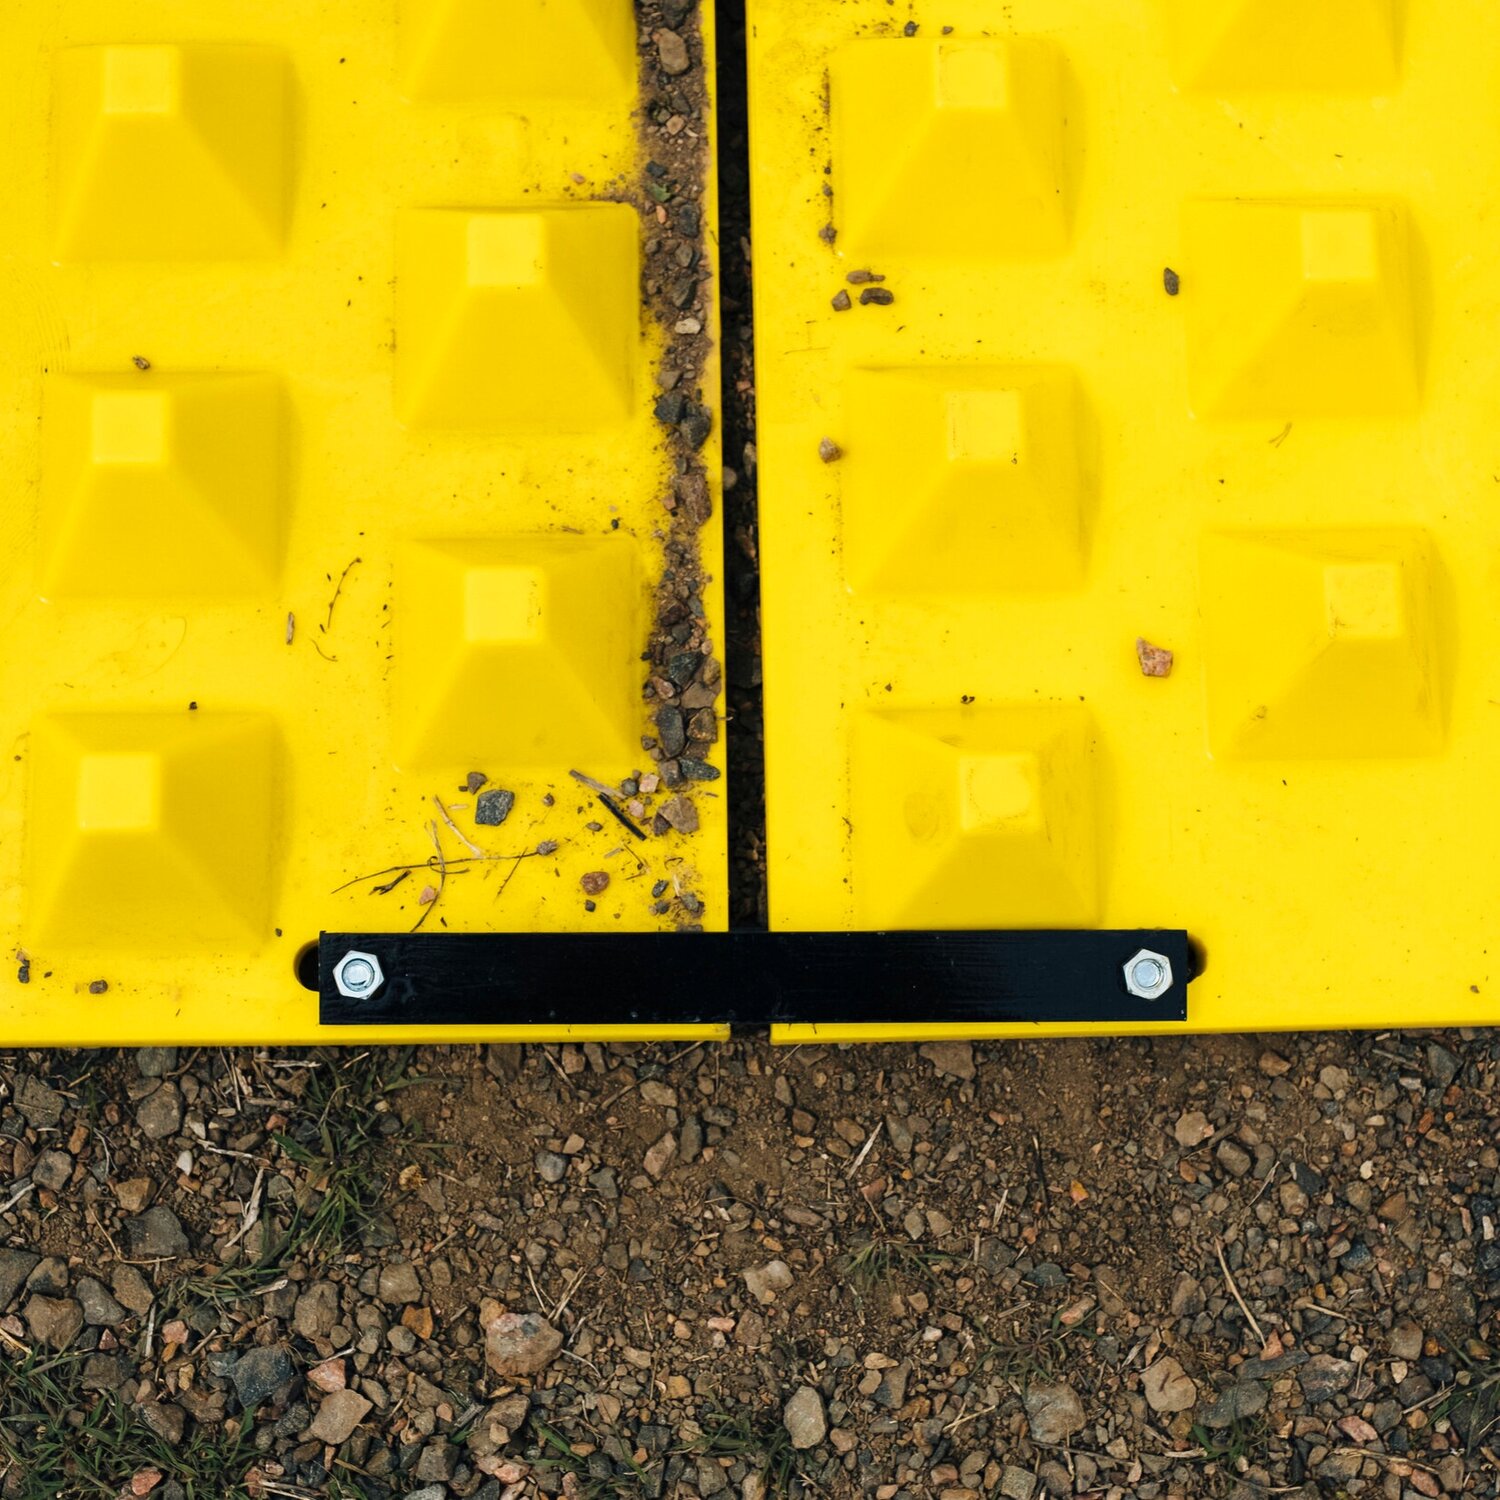 FODS tracking control mats connected with metal straps